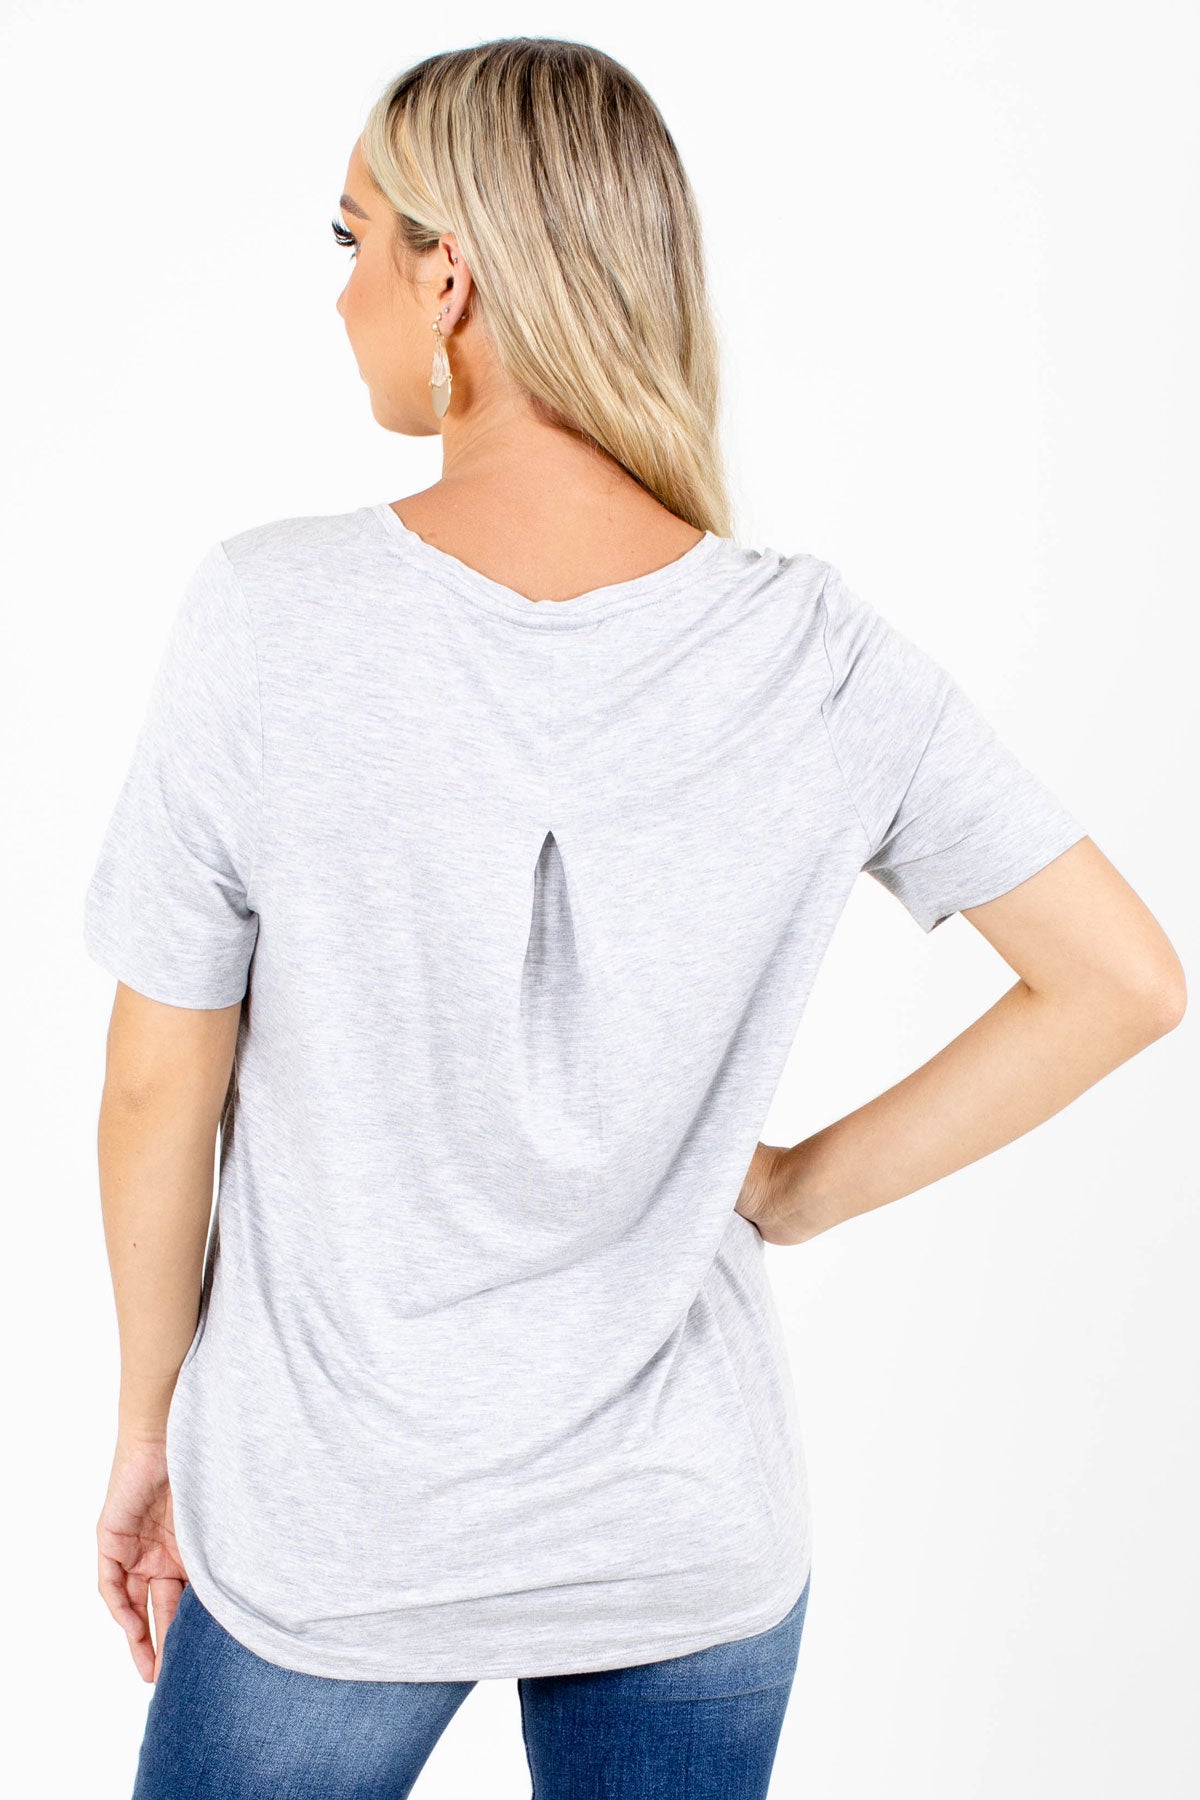 Short Sleeve Boutique Top in Heather Gray